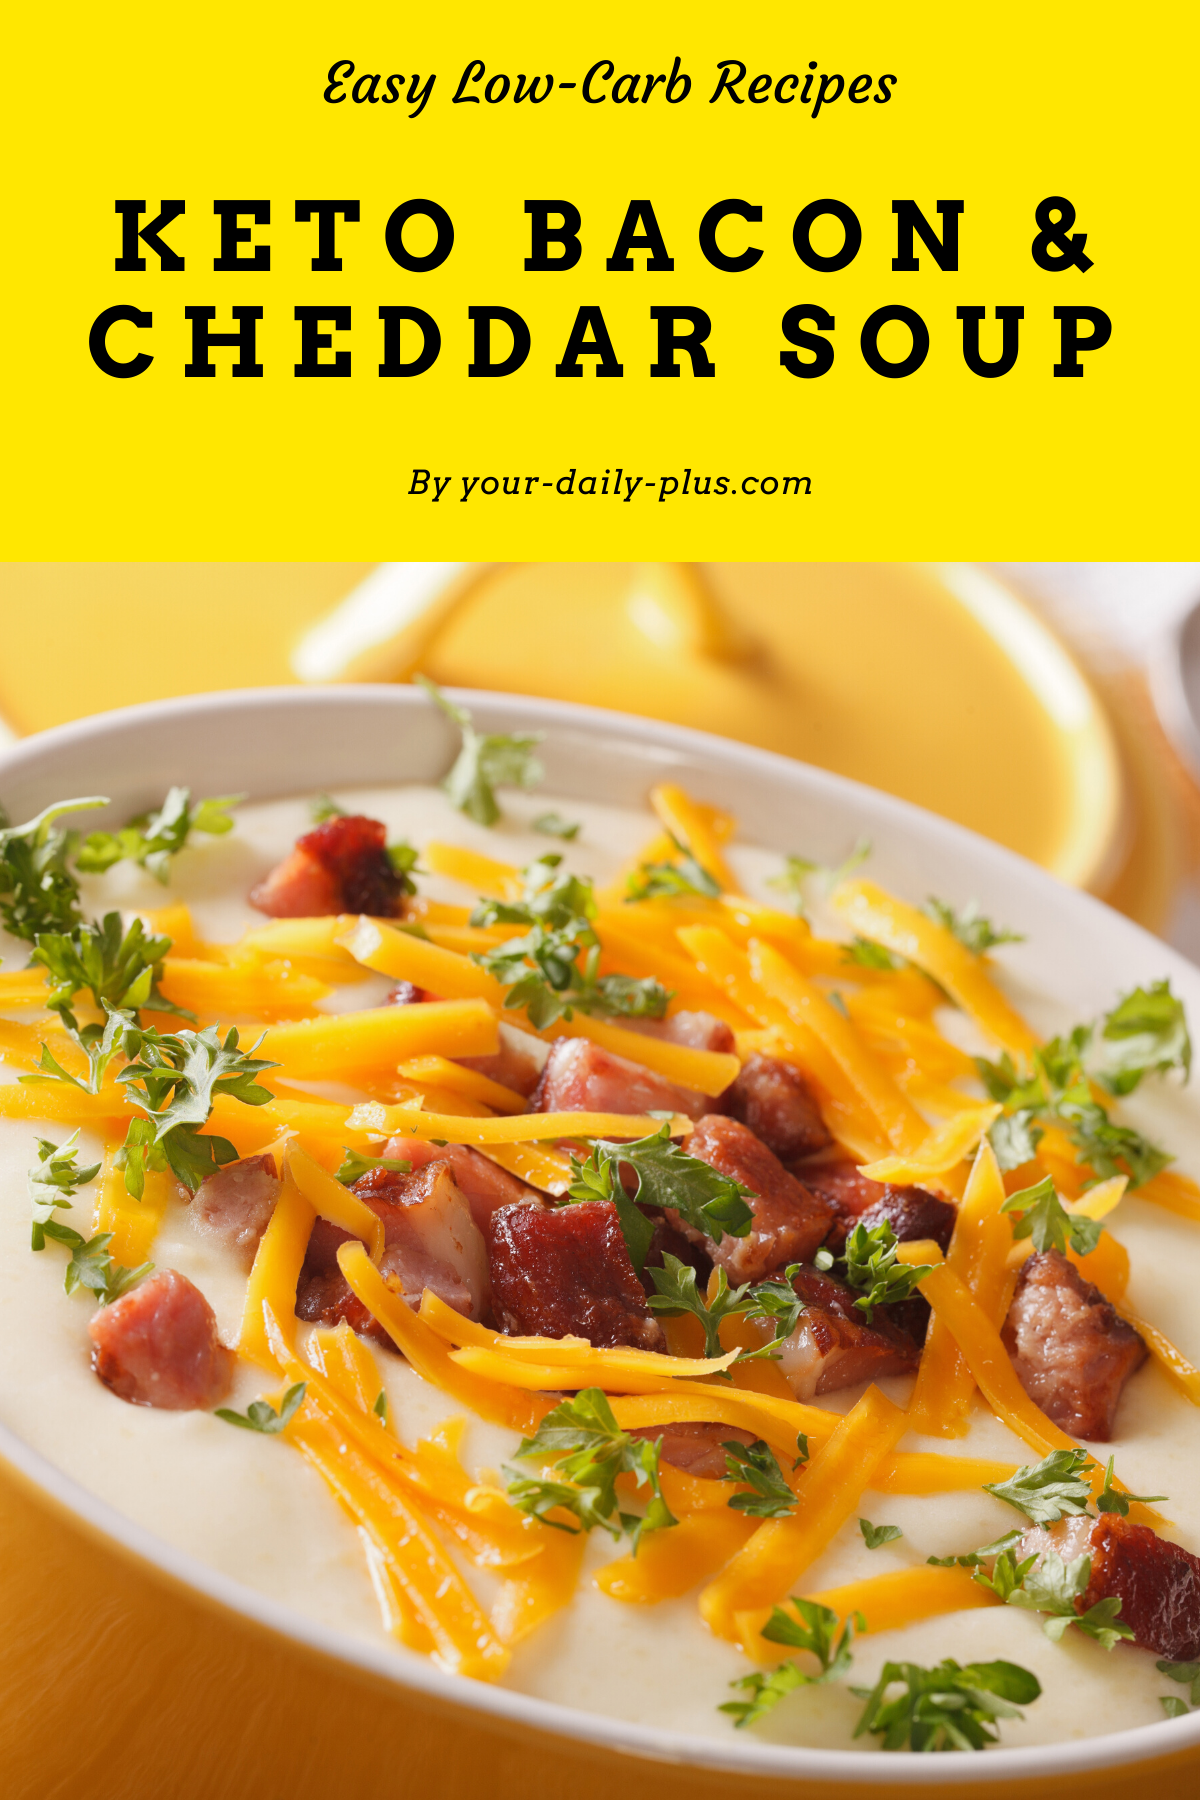 Creamy, delicious and a massive fat bomb, this soup is going to have you powering through your day with the strength of champions. We’ve combined sharp, cheddar cheese with bacon in an easy-to-make soup. #souprecipes #lowcarbsoup #keto #ketodiet